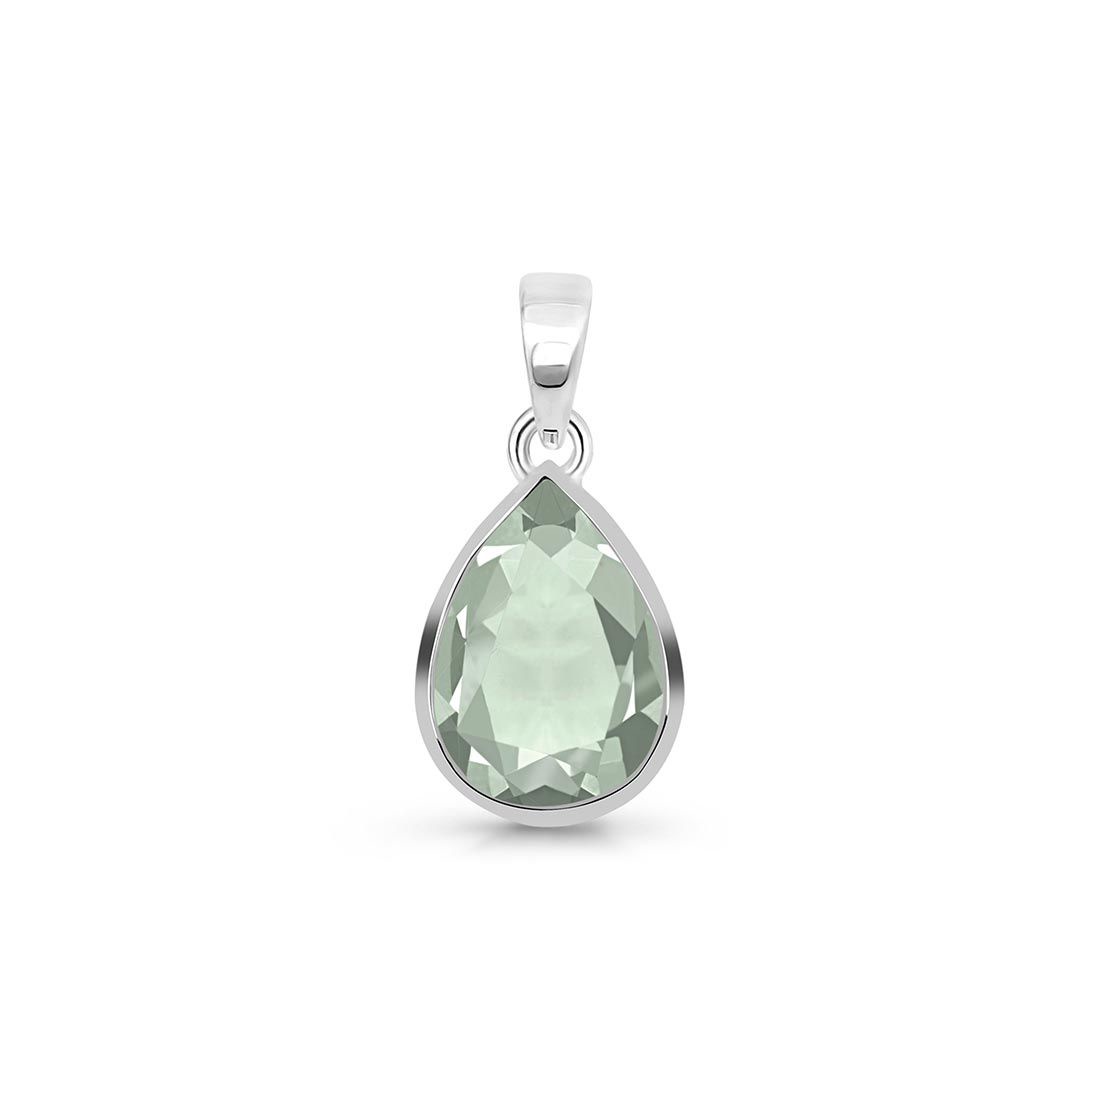 The Whole Caboodle of Green Amethyst Jewelry